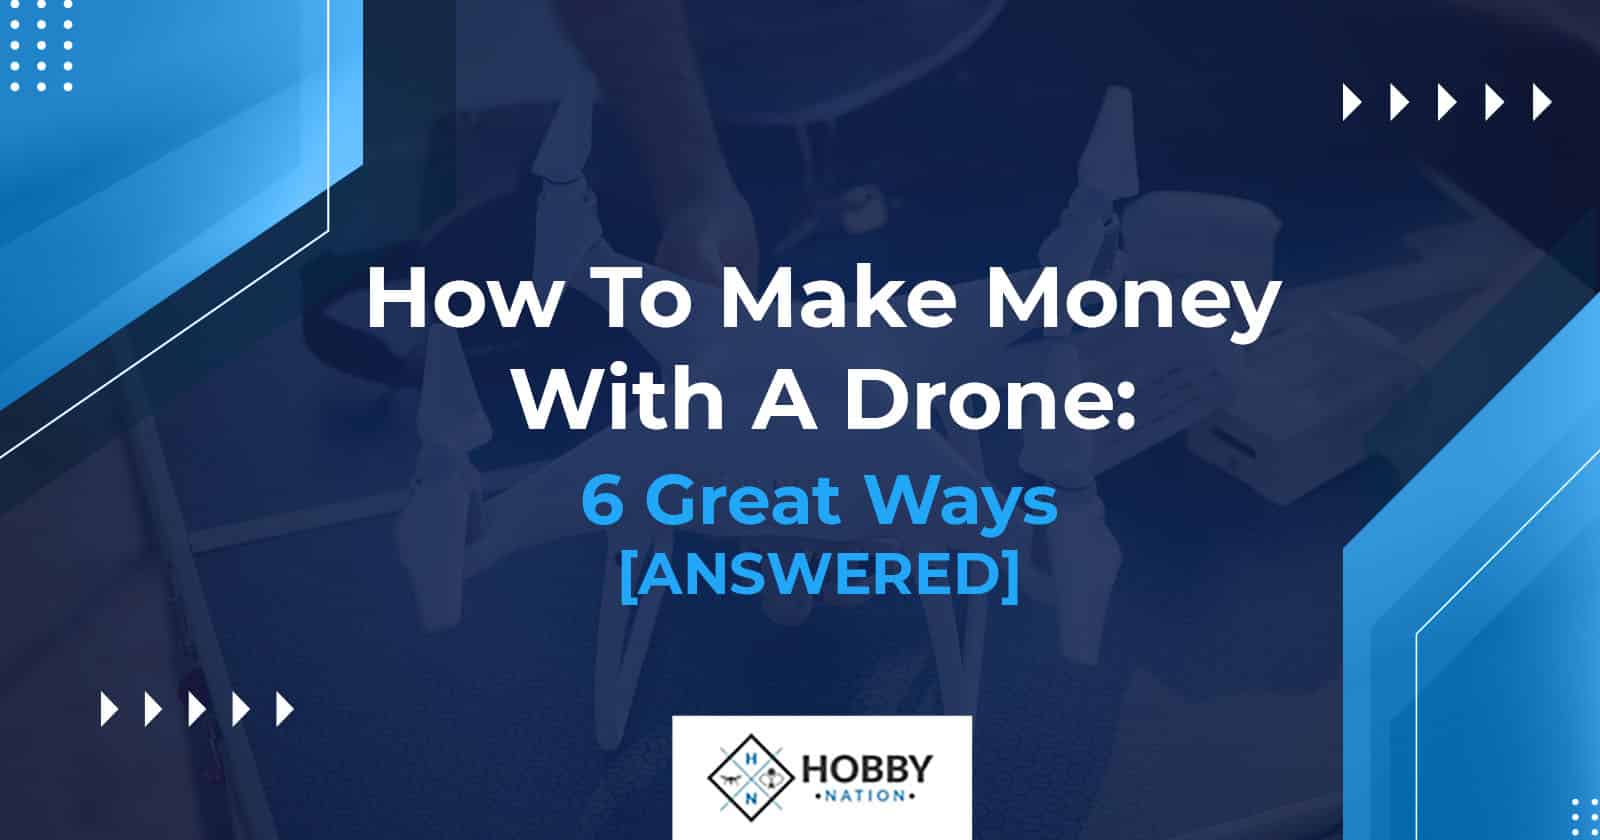 How To Make Money With A Drone: 6 Great Ways